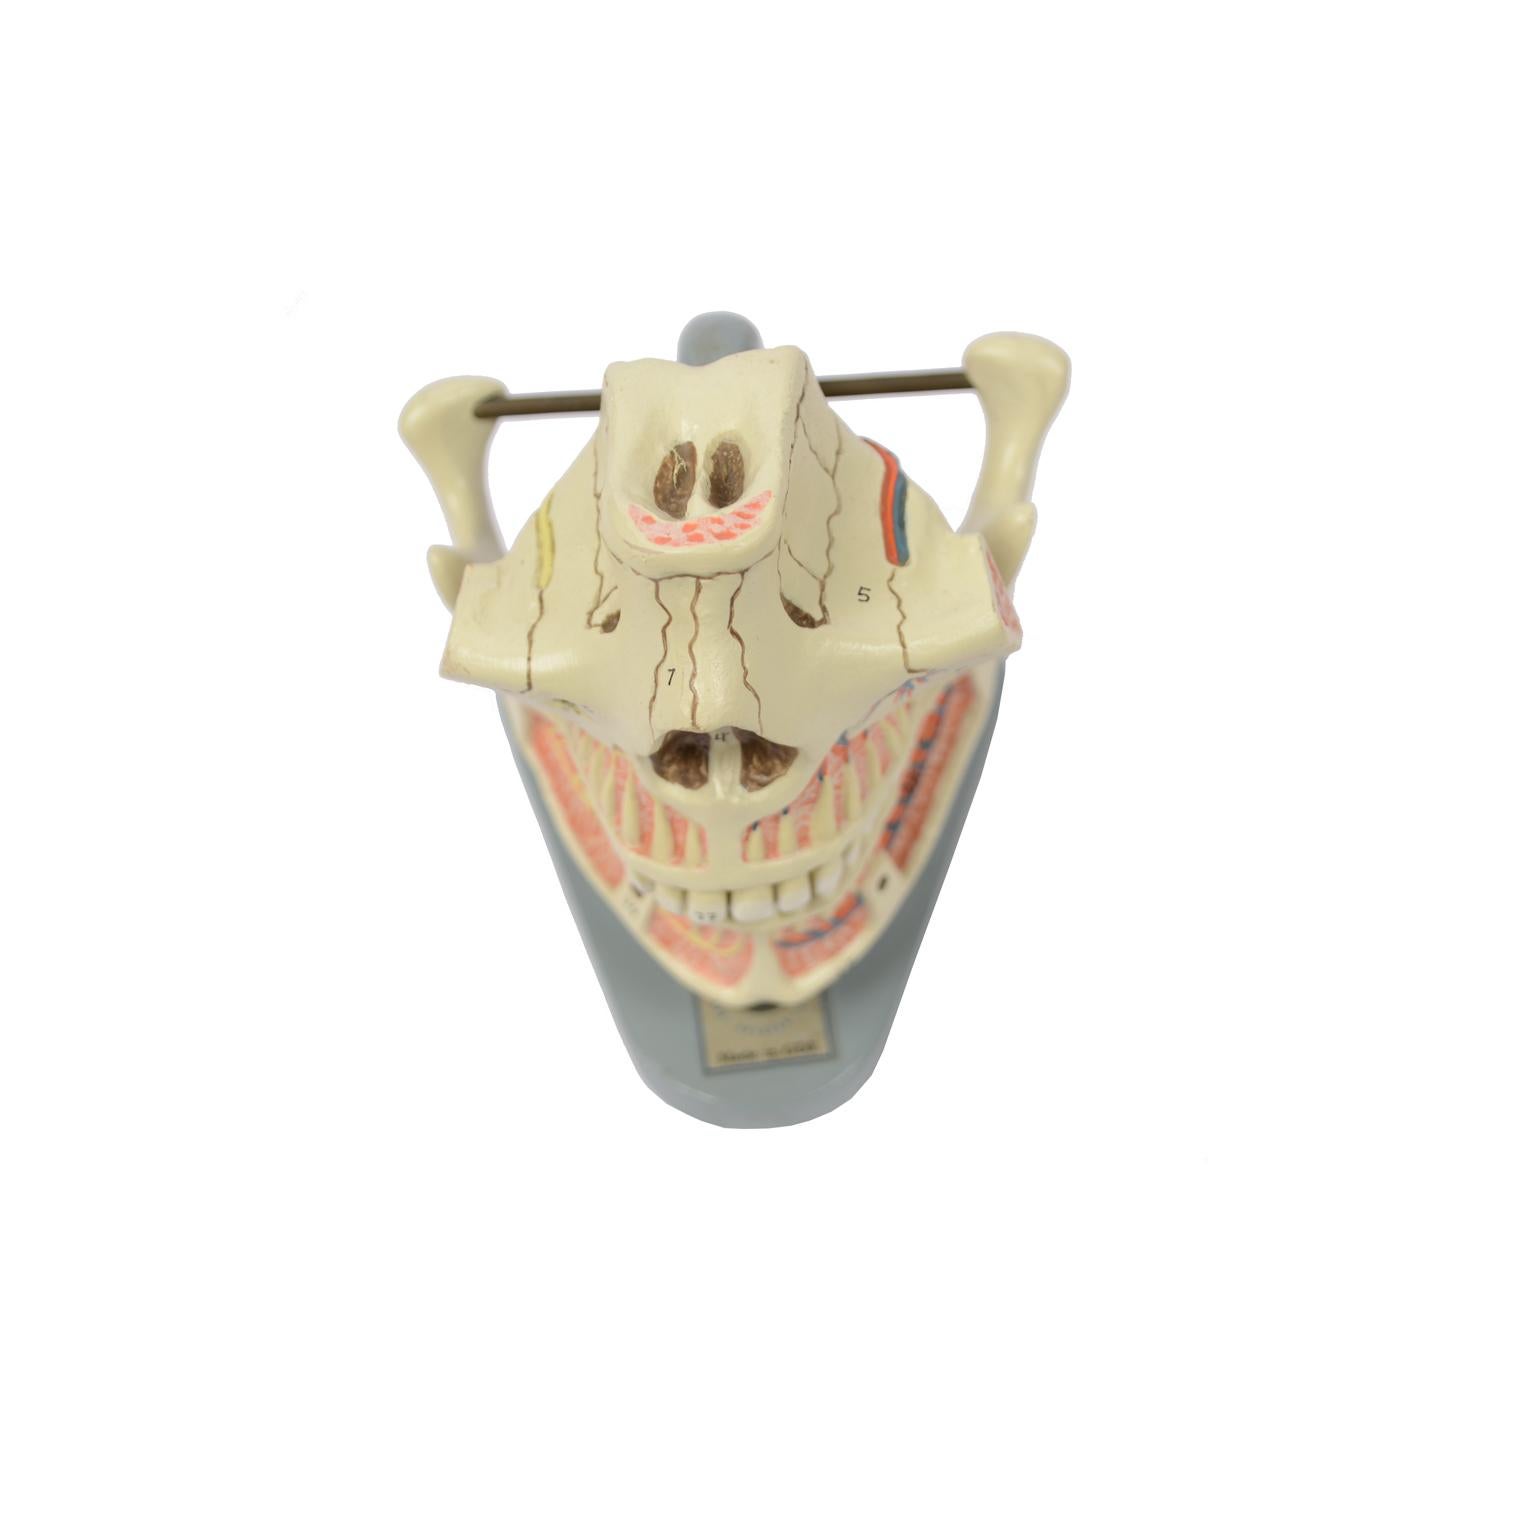 Didactic Anatomic Model of Mandible and Jaw Made in the 1950s 5